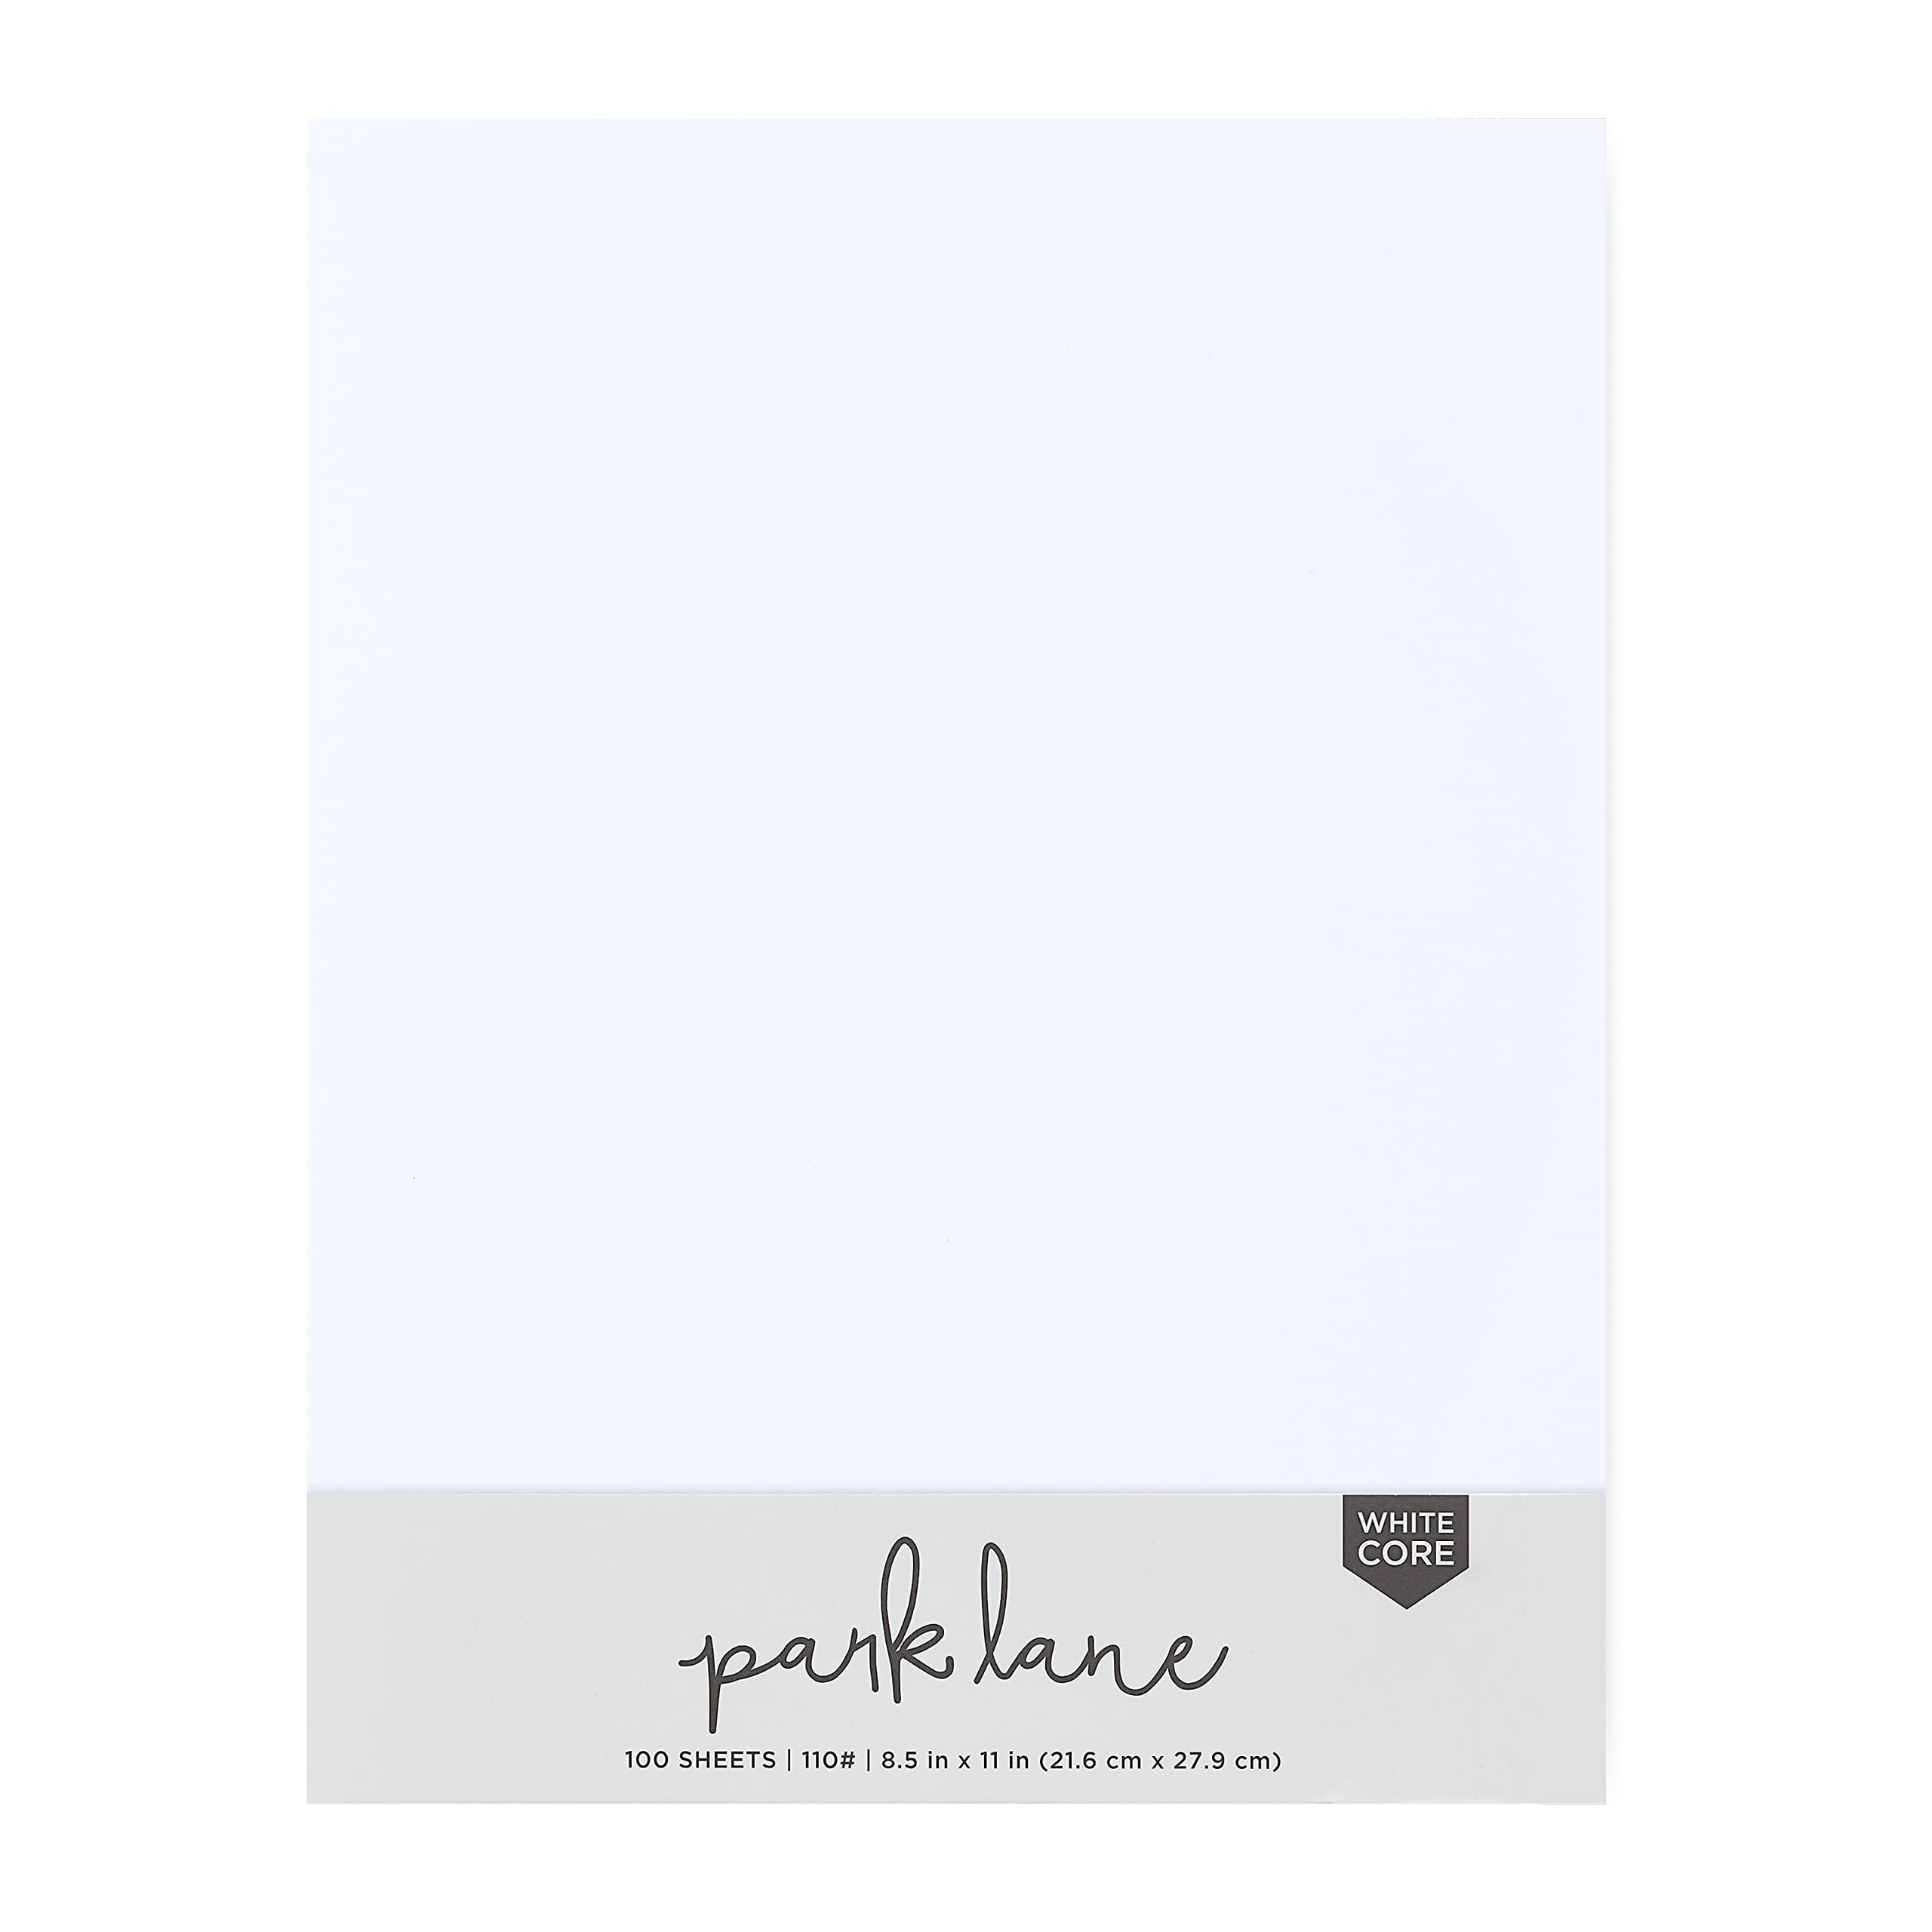 Jam Paper Strathmore Cardstock, 8.5 x 11, 130lb Bright White Wove, 25 Sheets/Pack